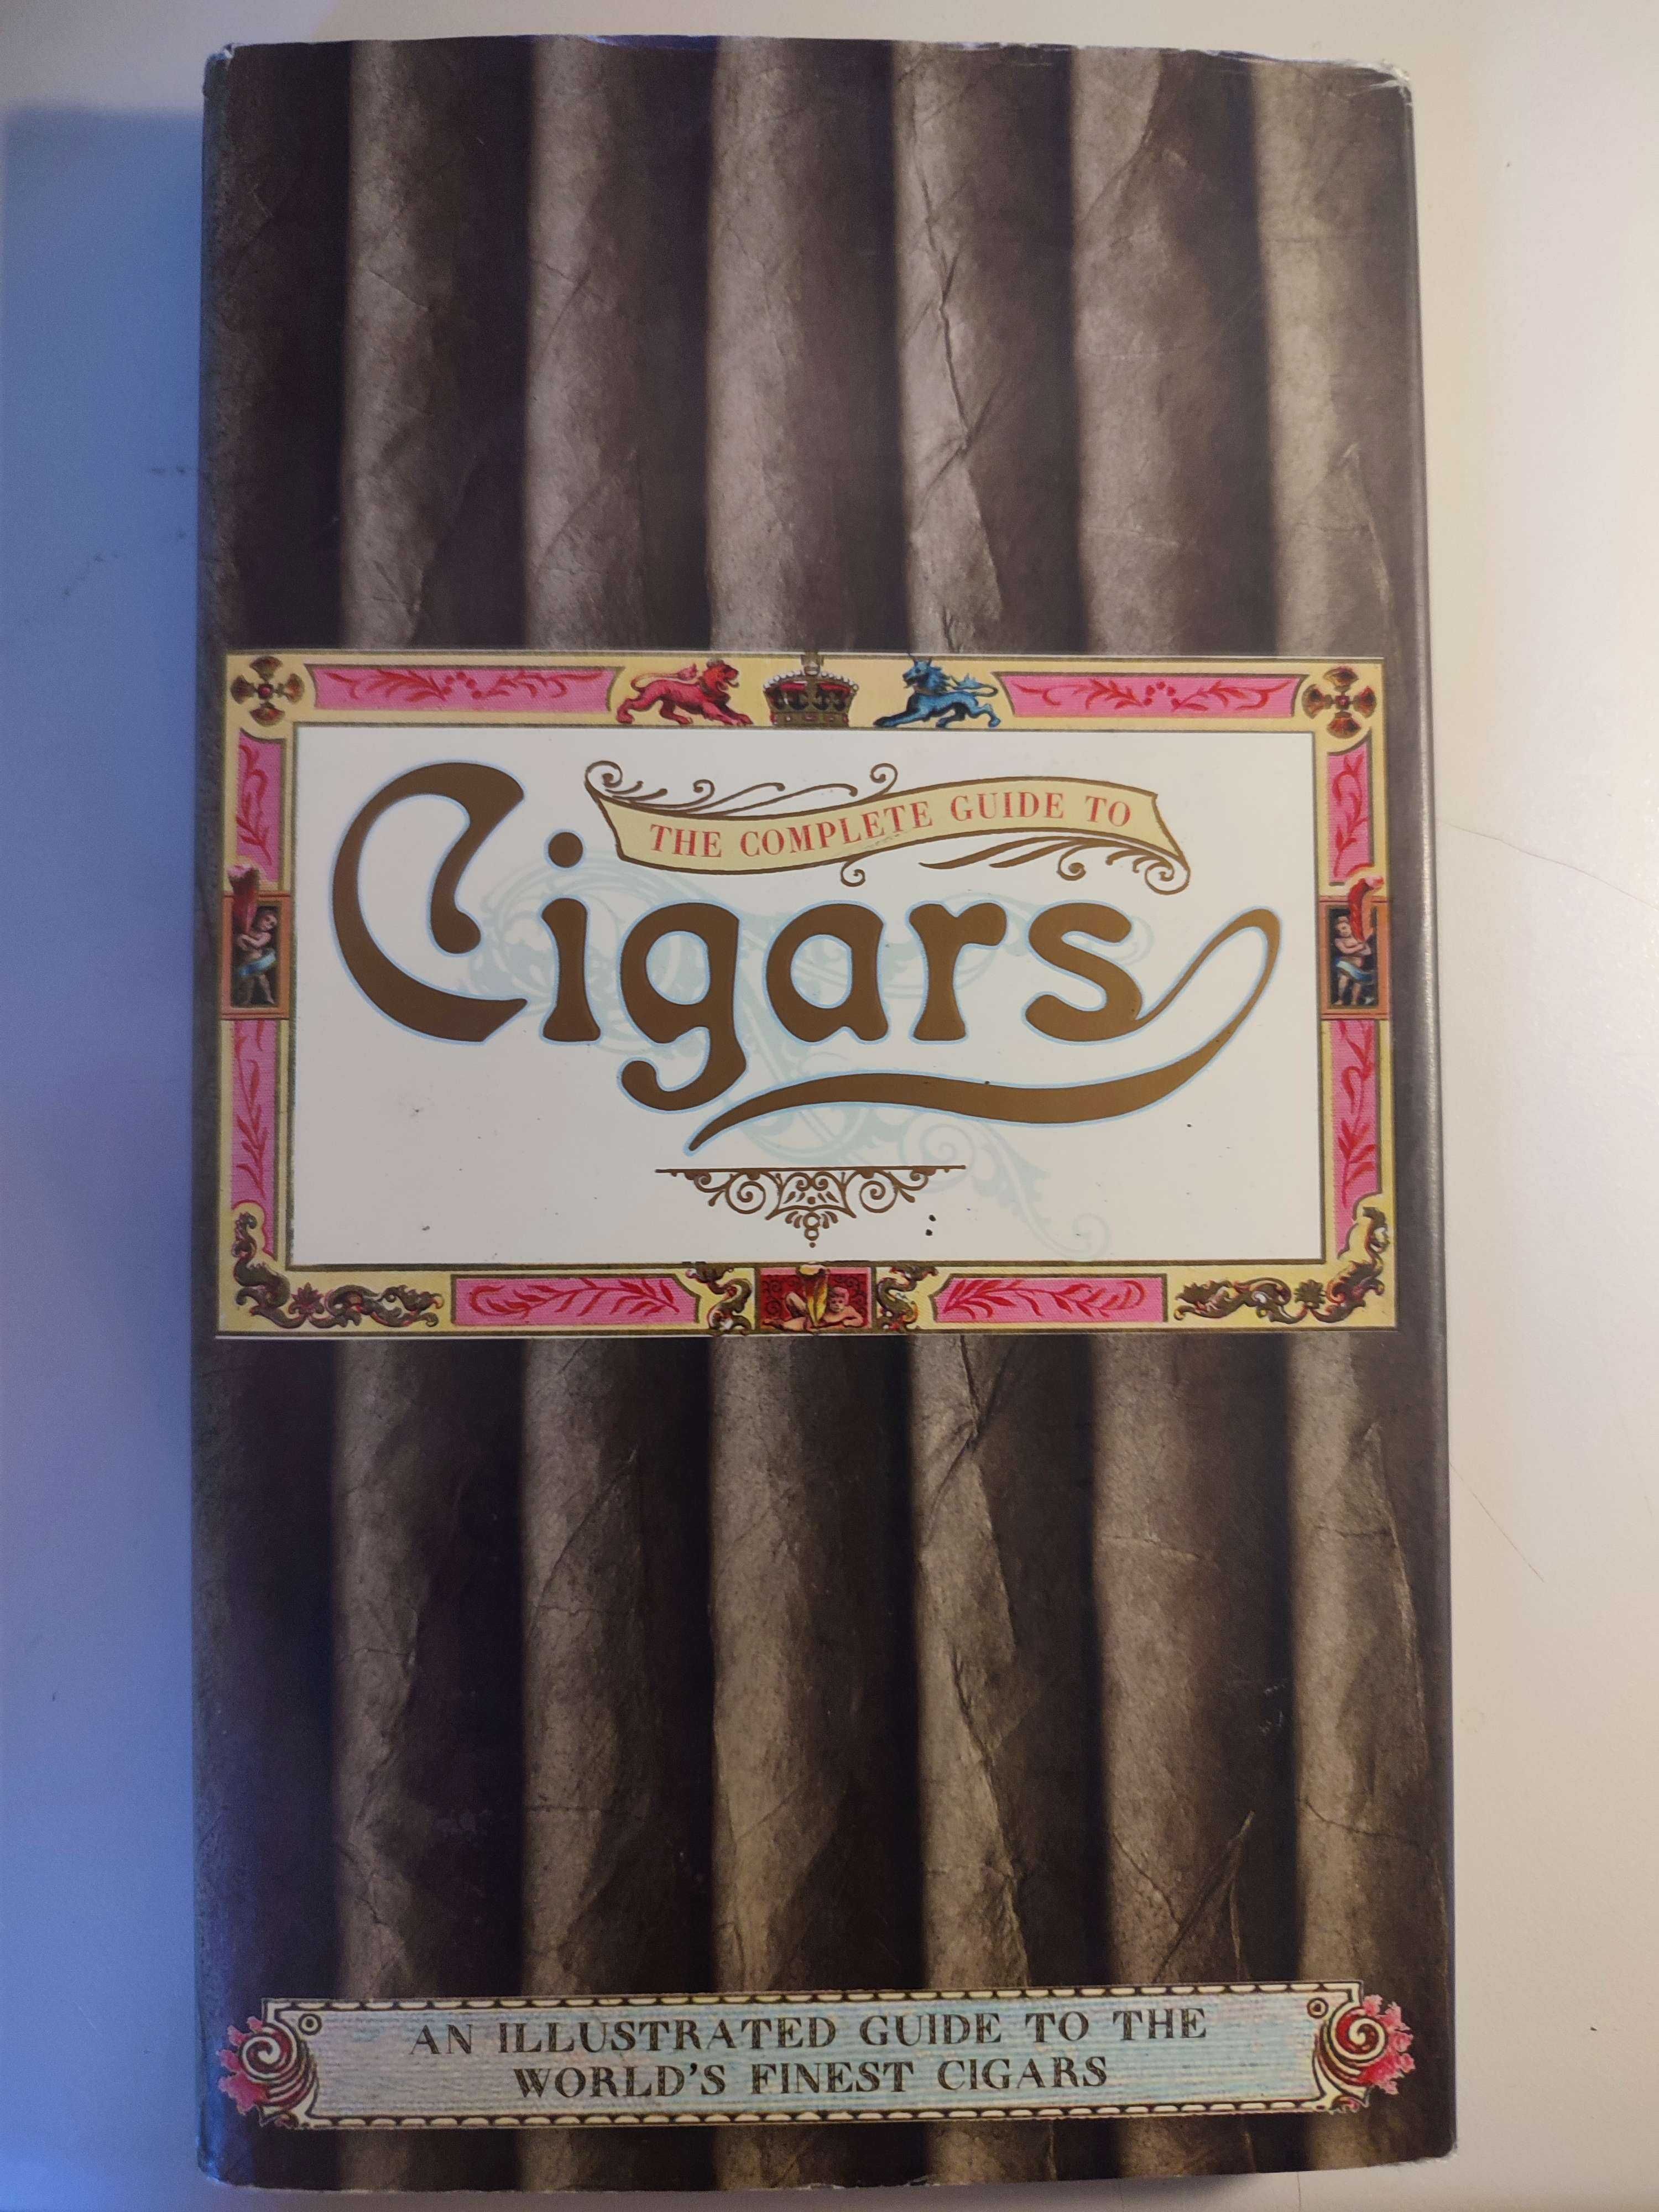 Livro "The Complete Guide to Cigars"